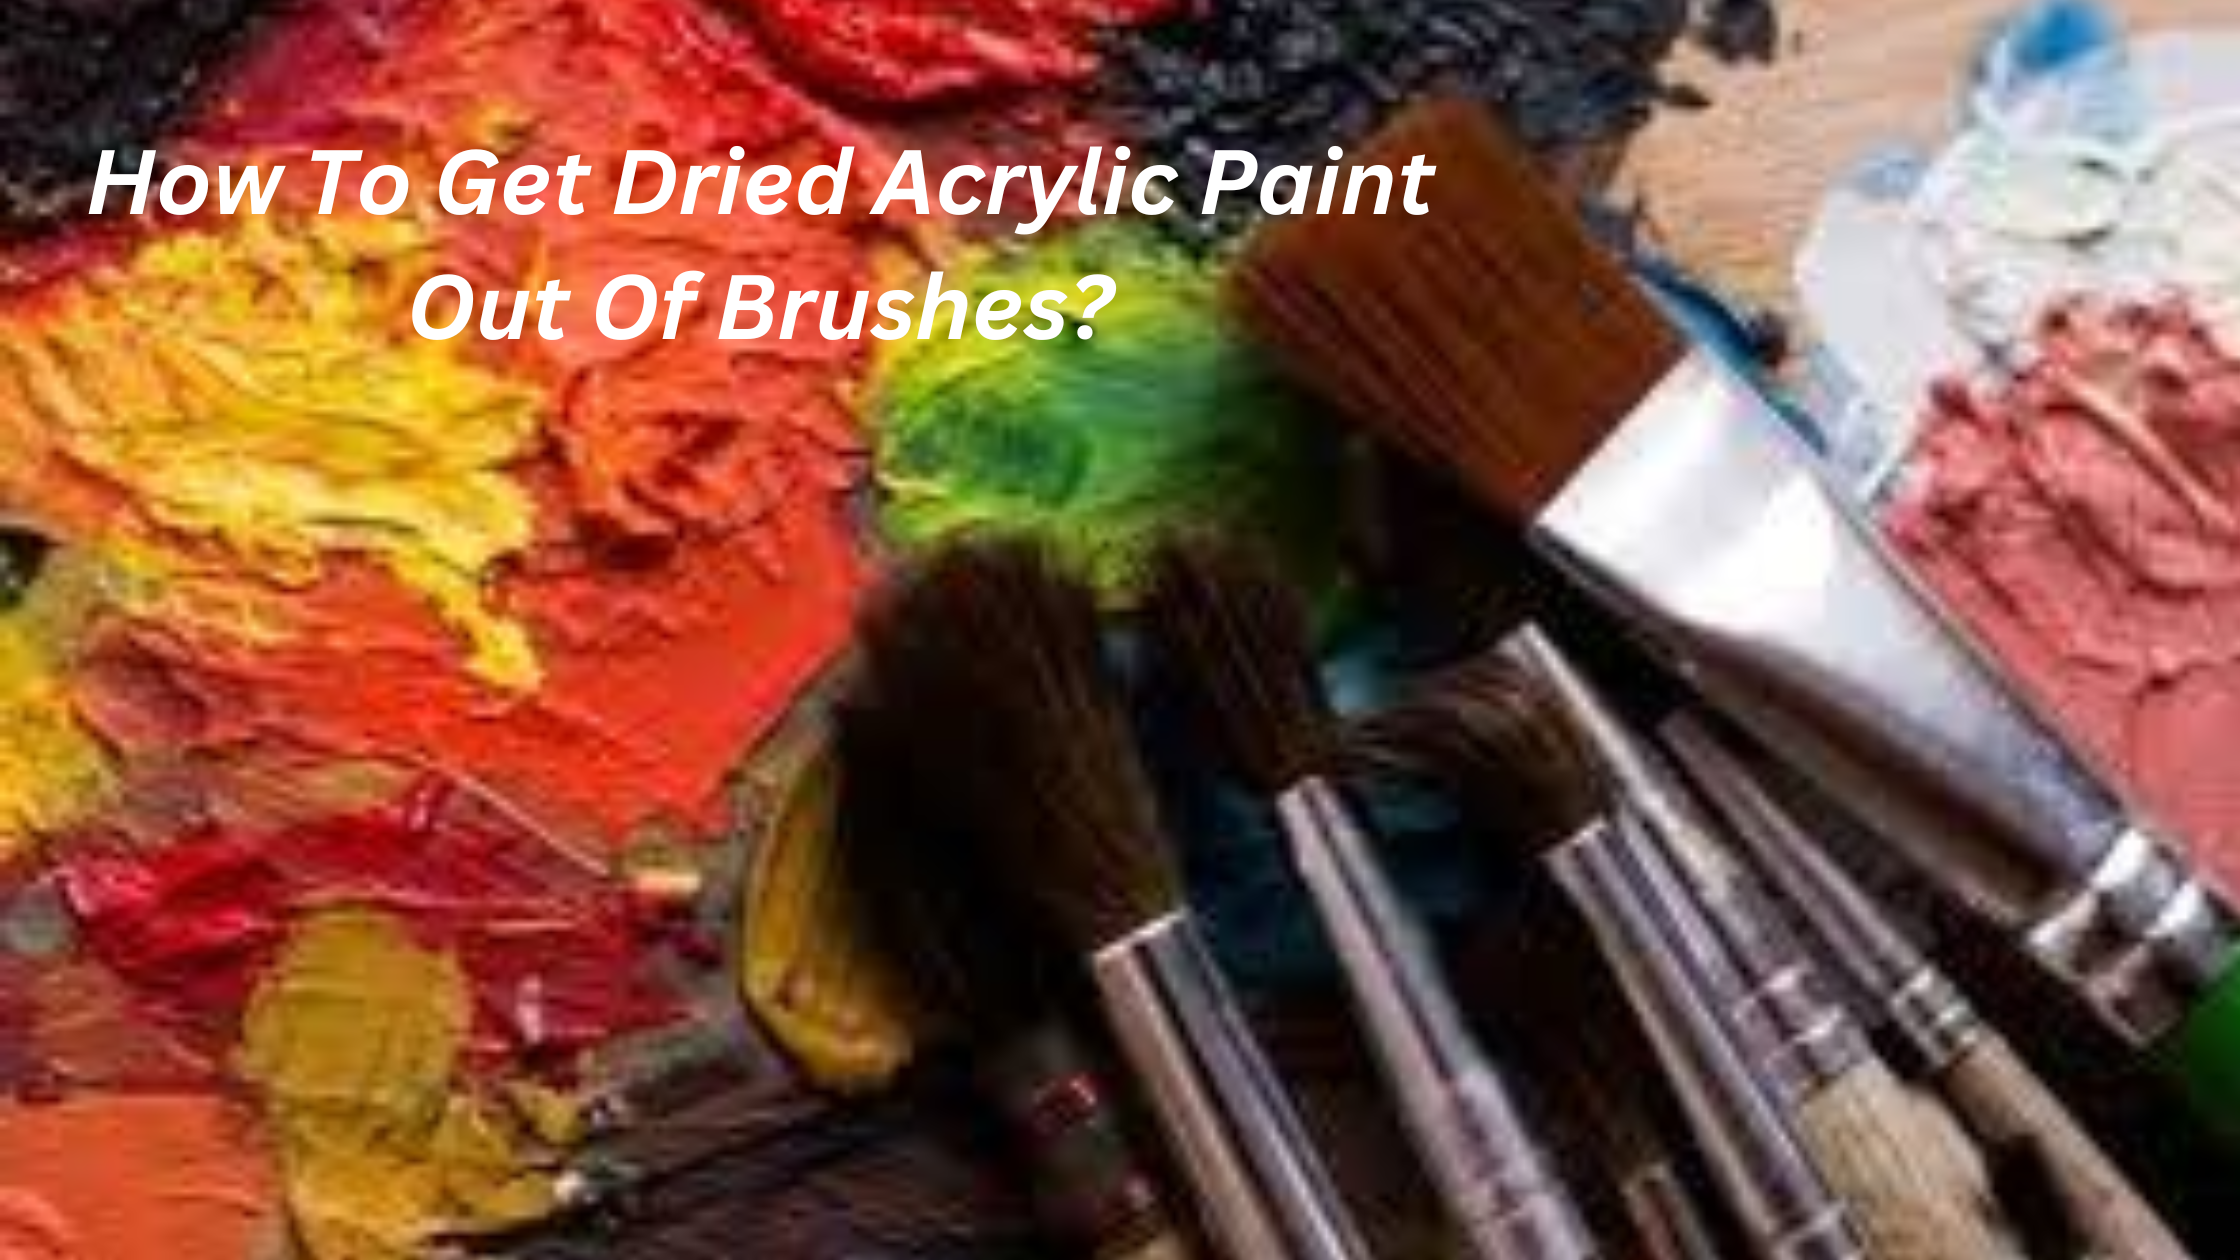 How To Get Dried Acrylic Paint Out Of Brushes?